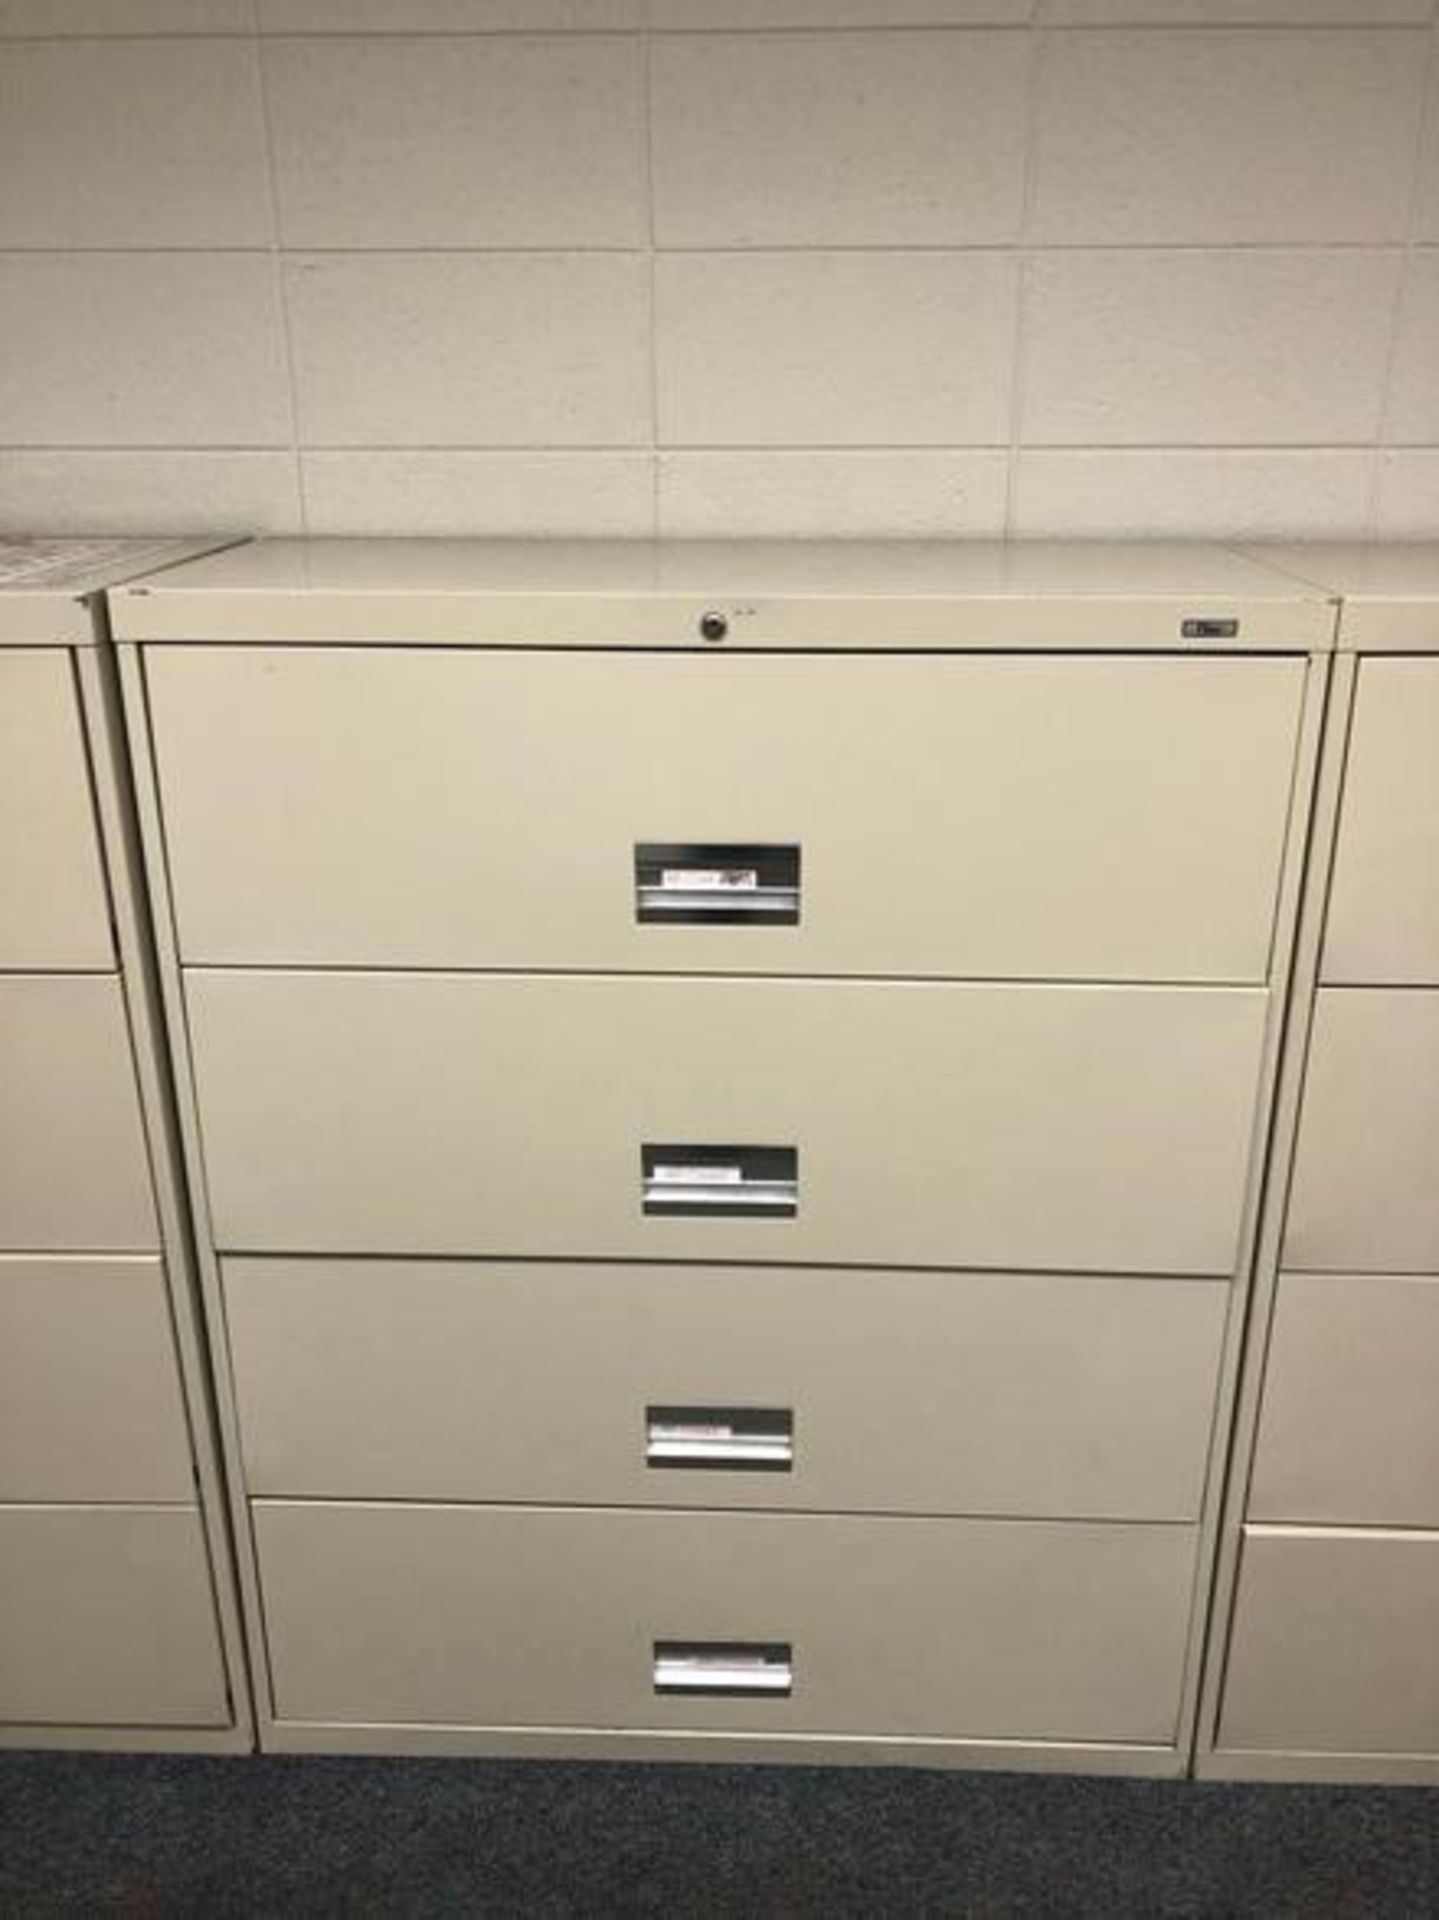 3 Flex Model Vertical 3 Drawers File Cabinet Size 42' X 18" X 52" - Image 4 of 9